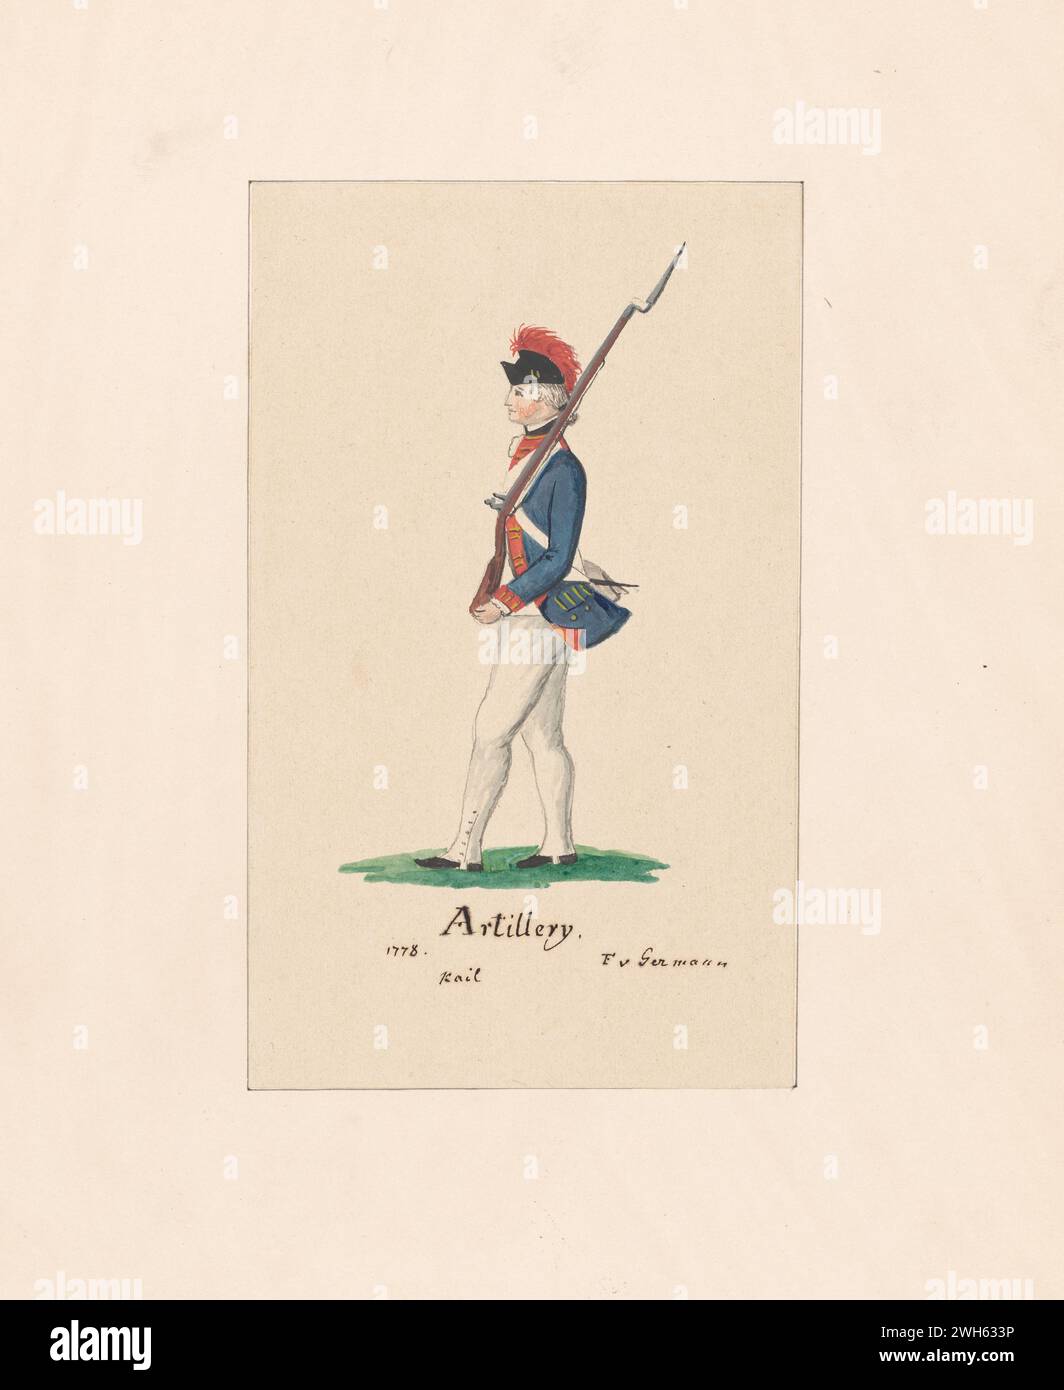 “Watercolor of a Soldier from the Artillery detachments regiment in the Brunswick (Braunschweig) Corps during the American Revolutionary War” circa 1778.   From a series of prints by Friedrich von German captain of a regiment from Hesse-Hanau, one of the many German auxiliary troops hired by George III to fight in the American Revolution. He arrived in North America in 1775 During the war, he painted a series of watercolors of American, British, and German soldiers. Stock Photo